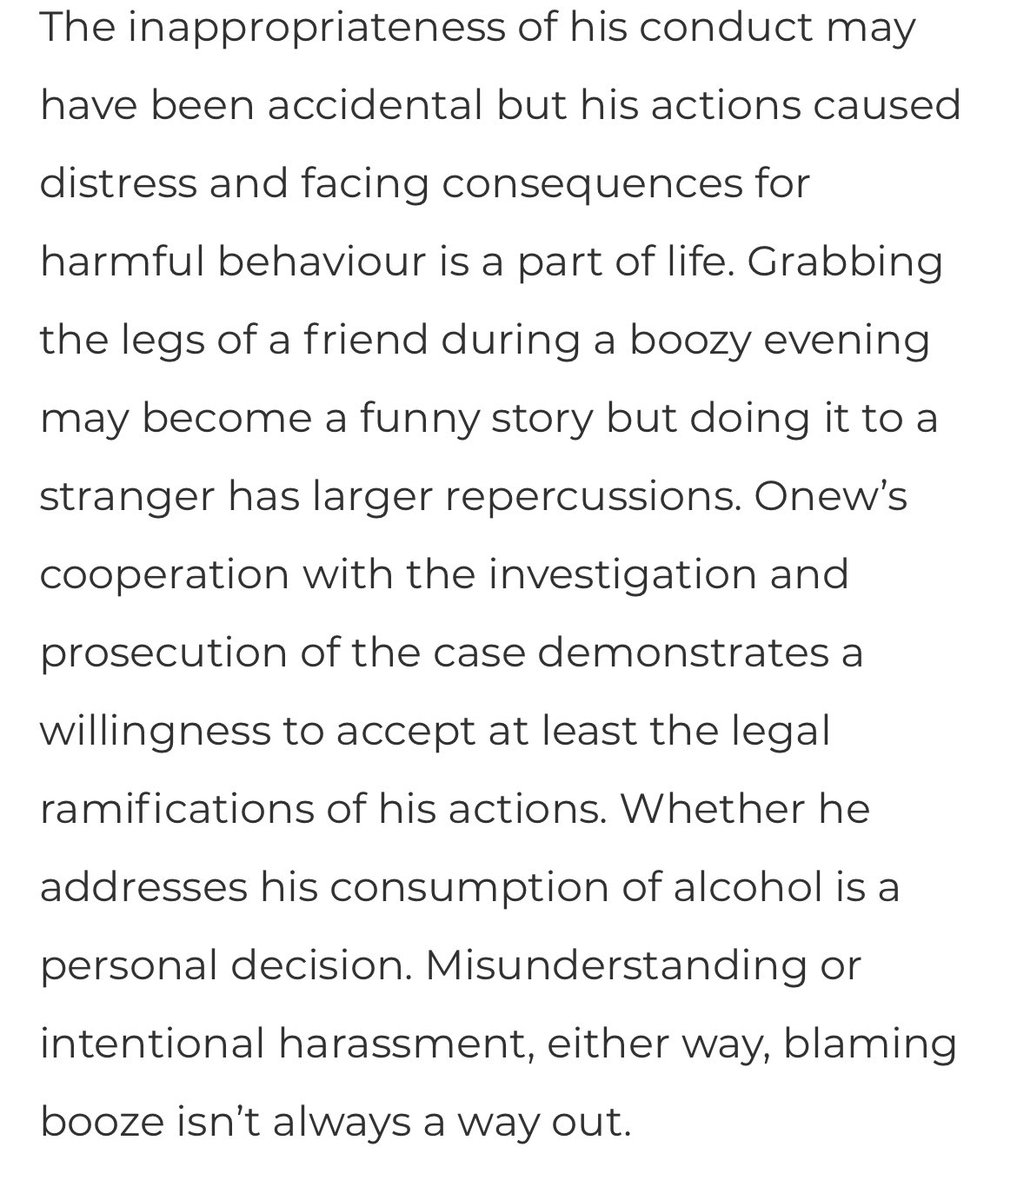 //tw Men get away with sexual harassment with an excuse of “being under influence” is enabling problematic behavior and putting women in risk.